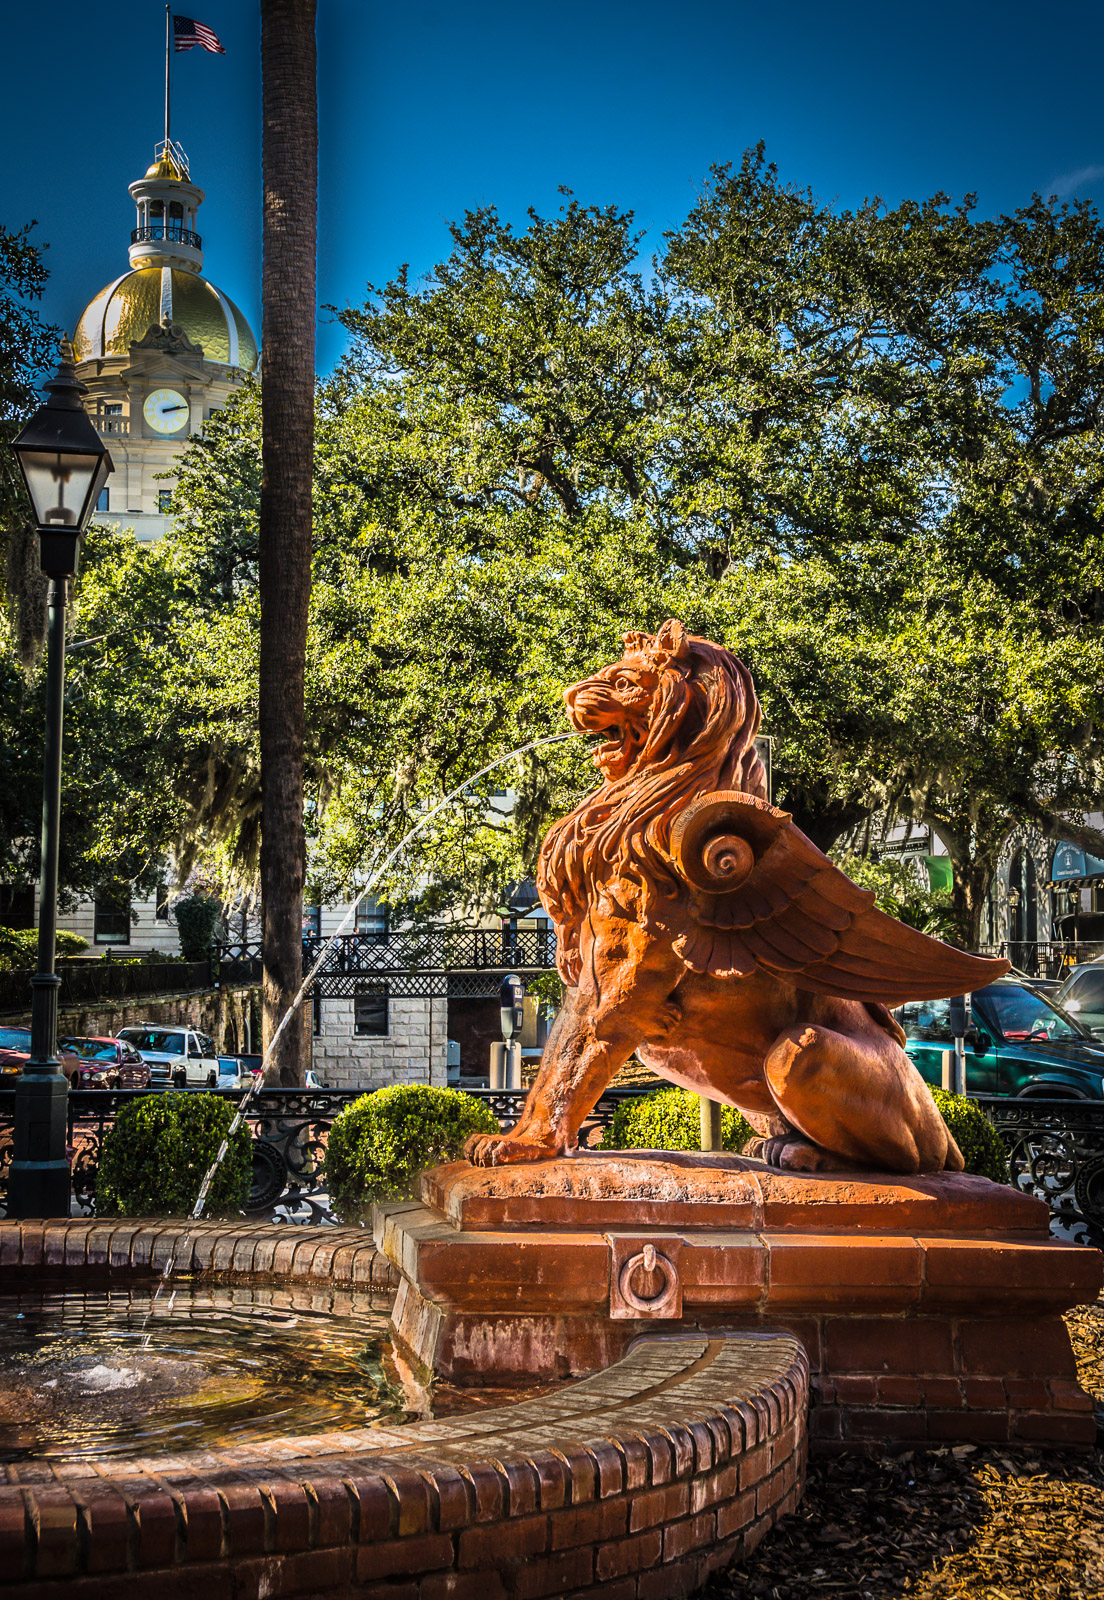 Savannah GA's spouting Lion Fountain in front of the Cotton Exchange, with gold roof of Savannah City Hall peeking out amidst trees in the background.